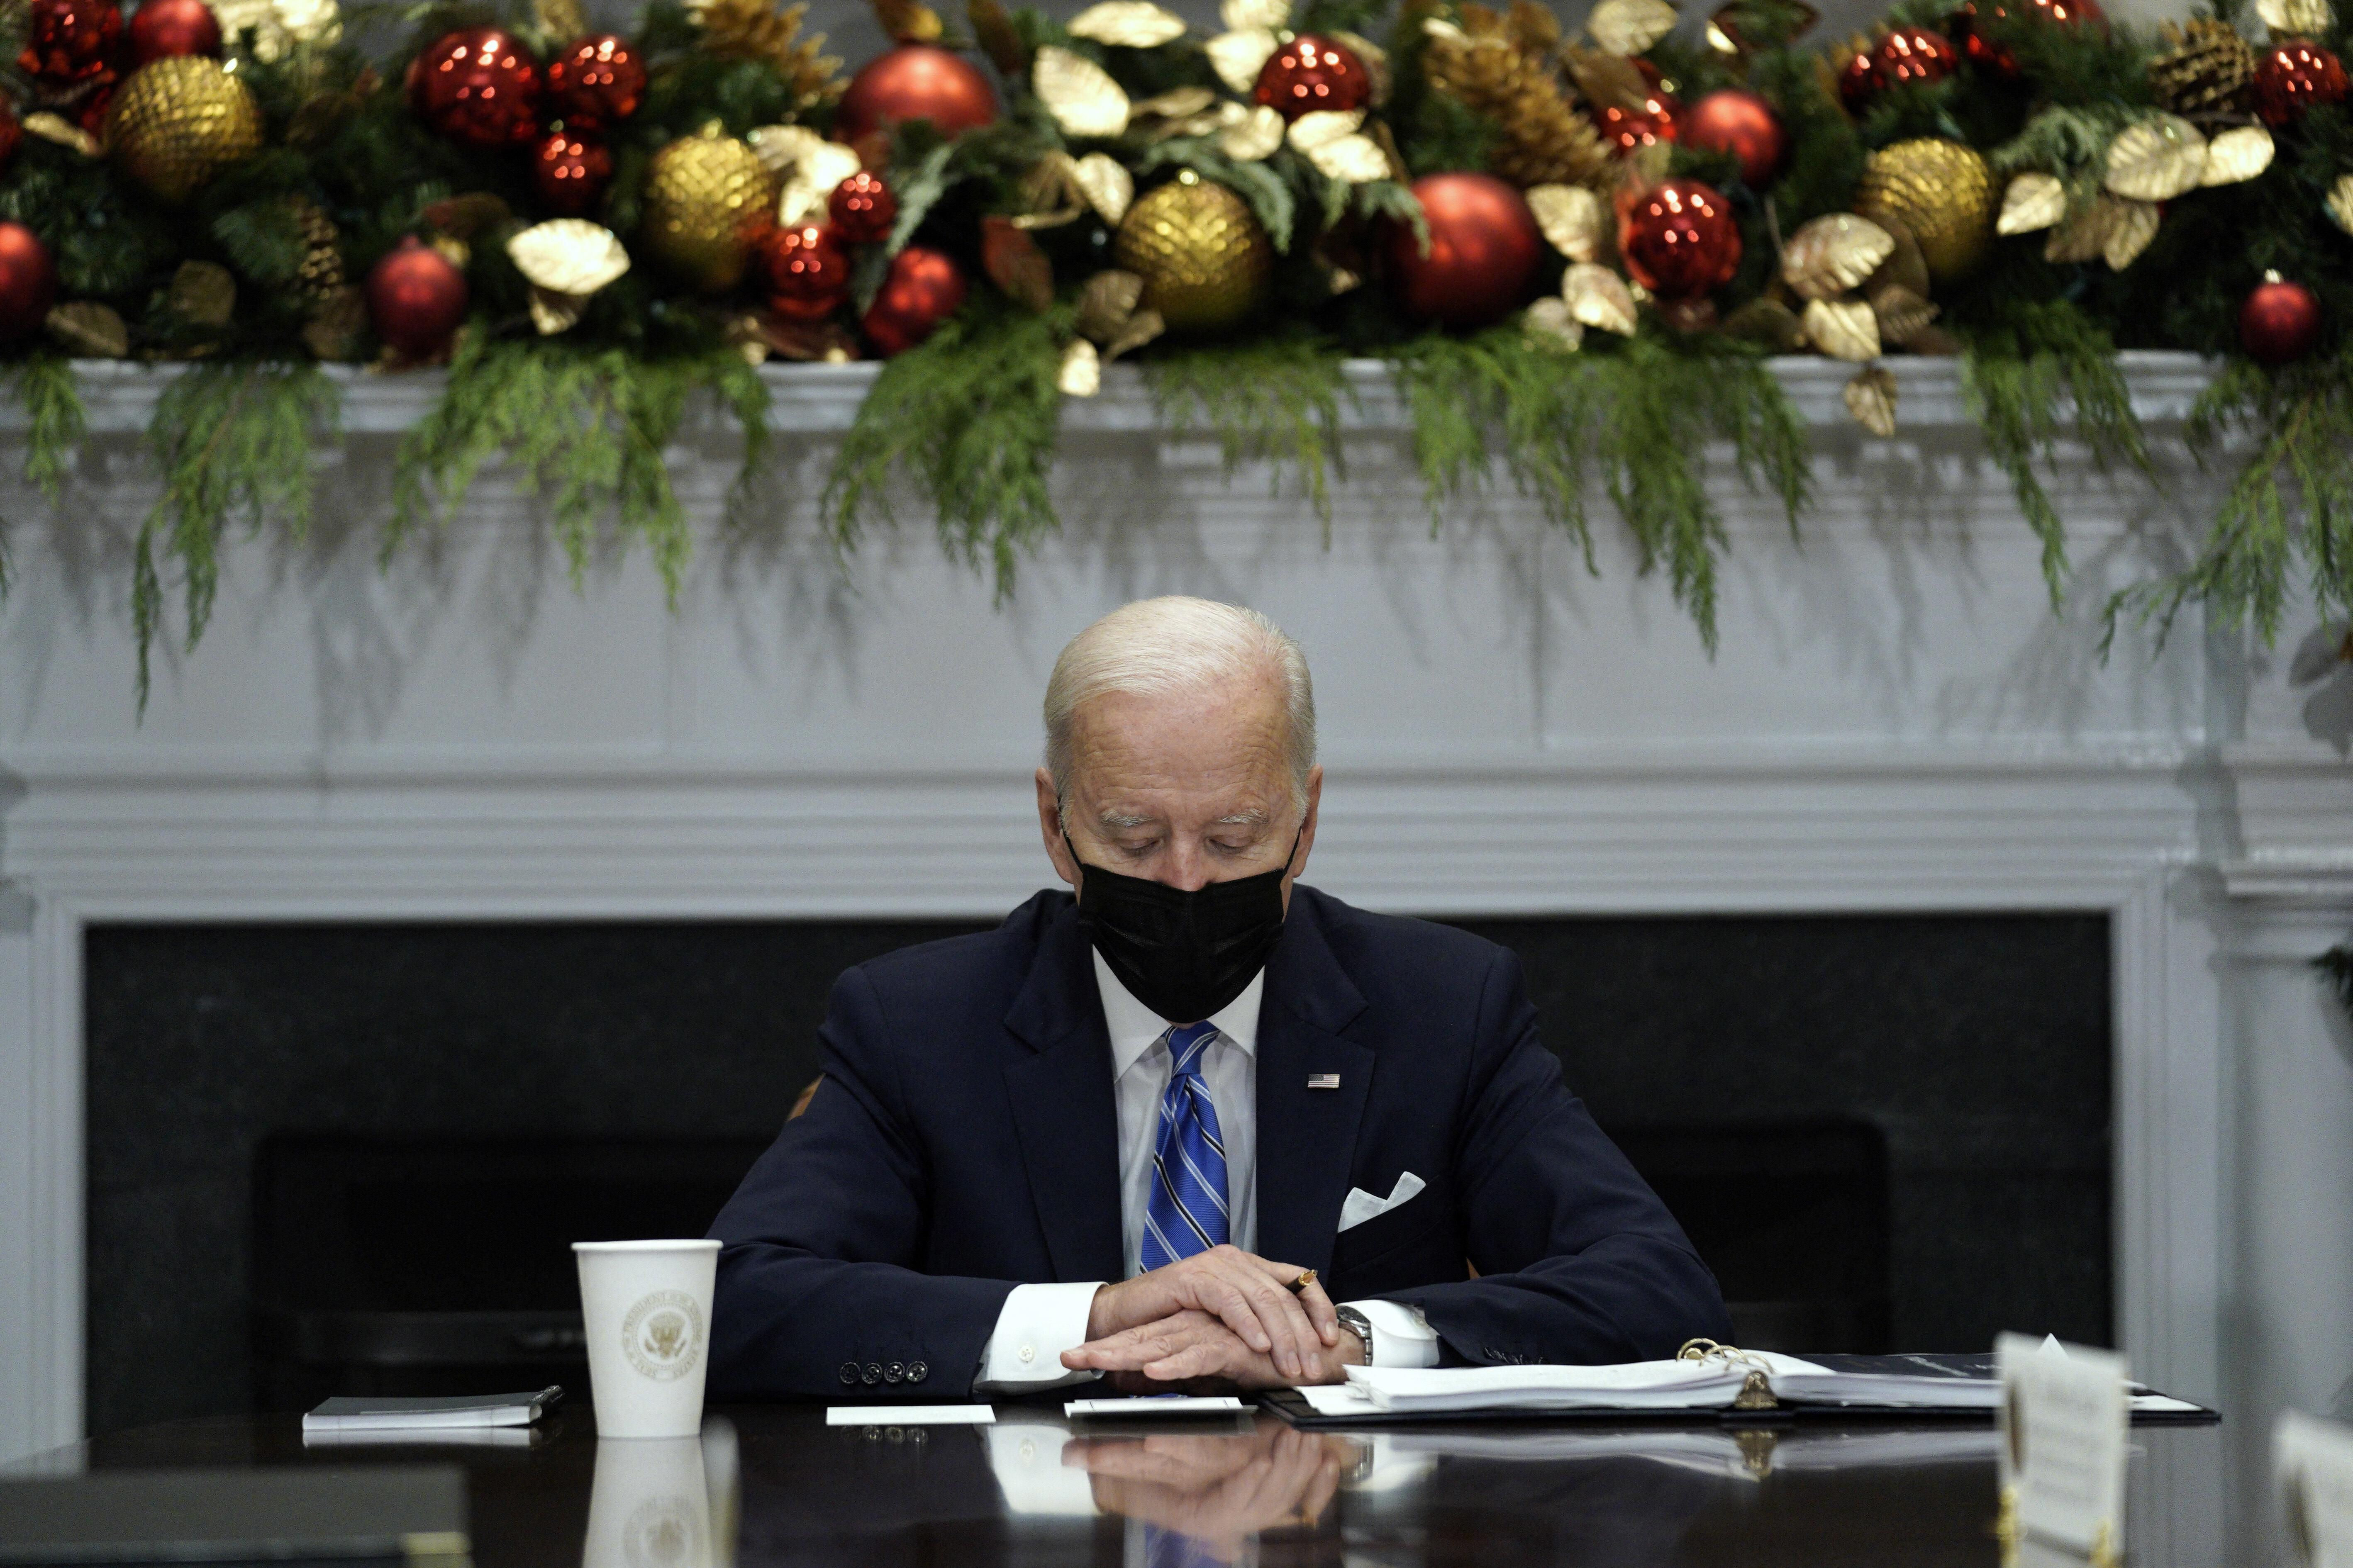 U.S. President Joe Biden meets with members of the White House COVID-19 Response Team on the latest developments related to the Omicron variant in the Roosevelt Room in the White House in Washington, U.S., December 16, 2021